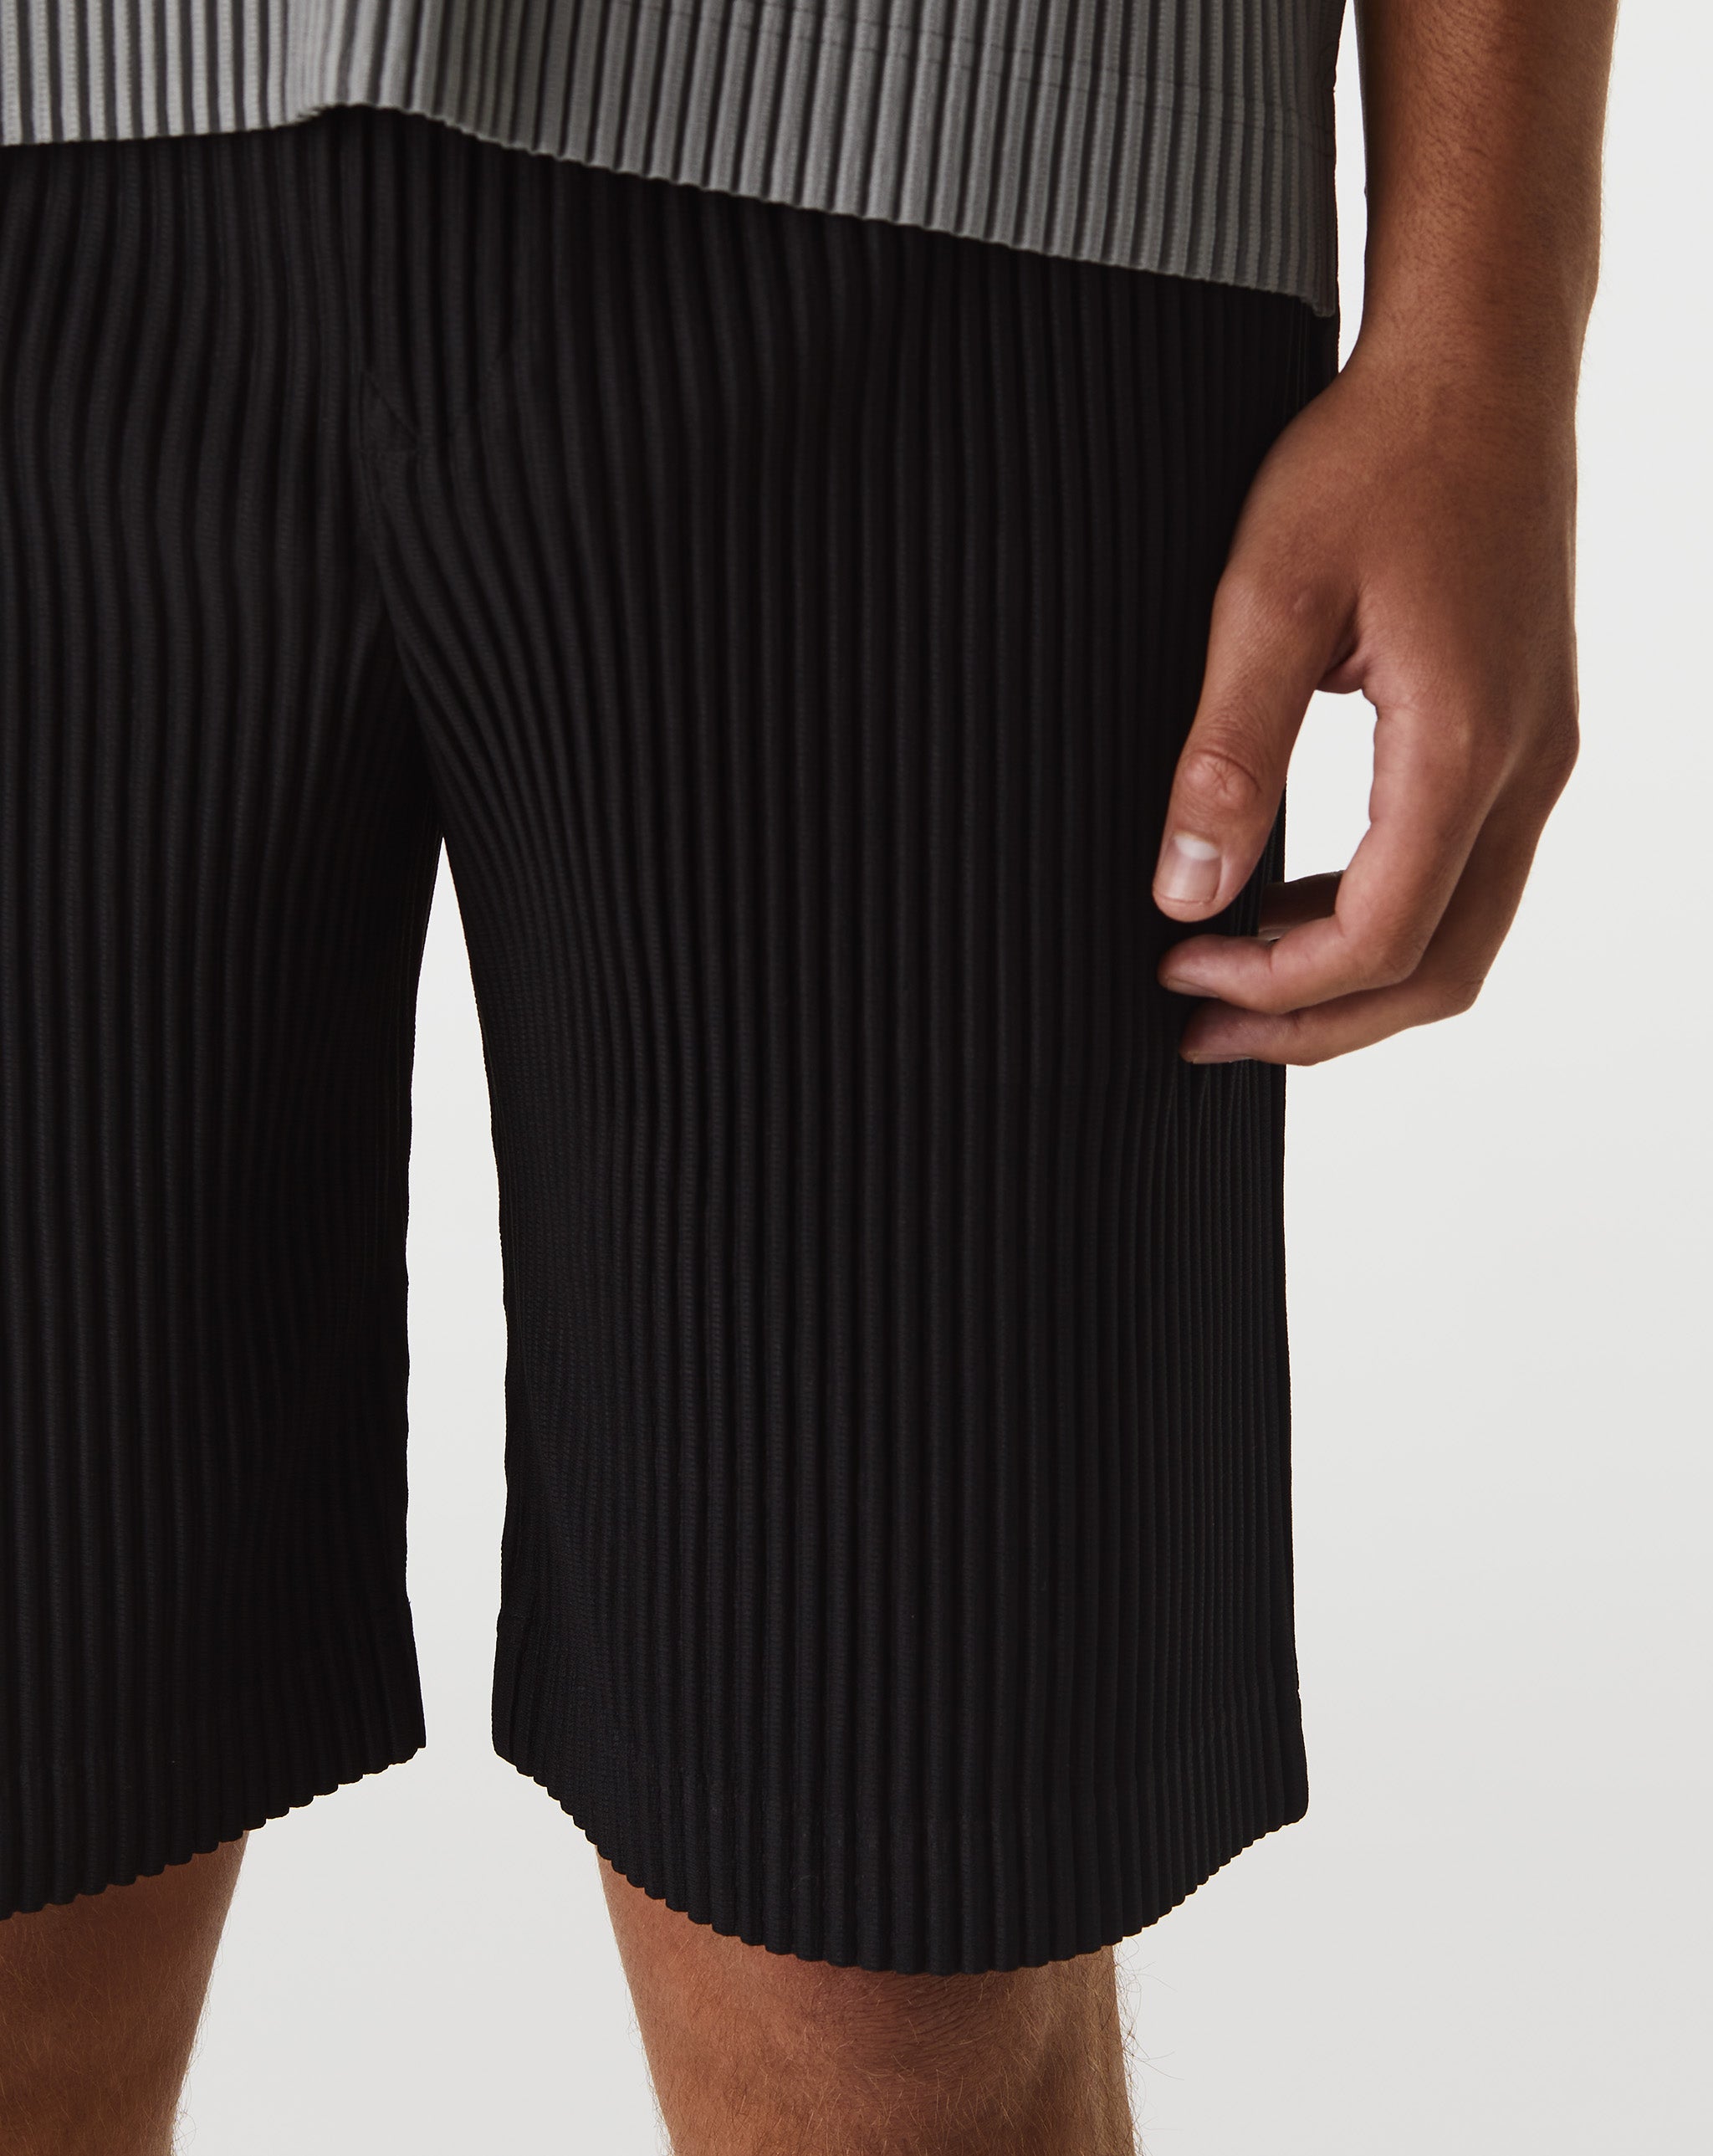 Nike Has a New Metcon Shoe Approved MC May Shorts  - Cheap Cerbe Jordan outlet